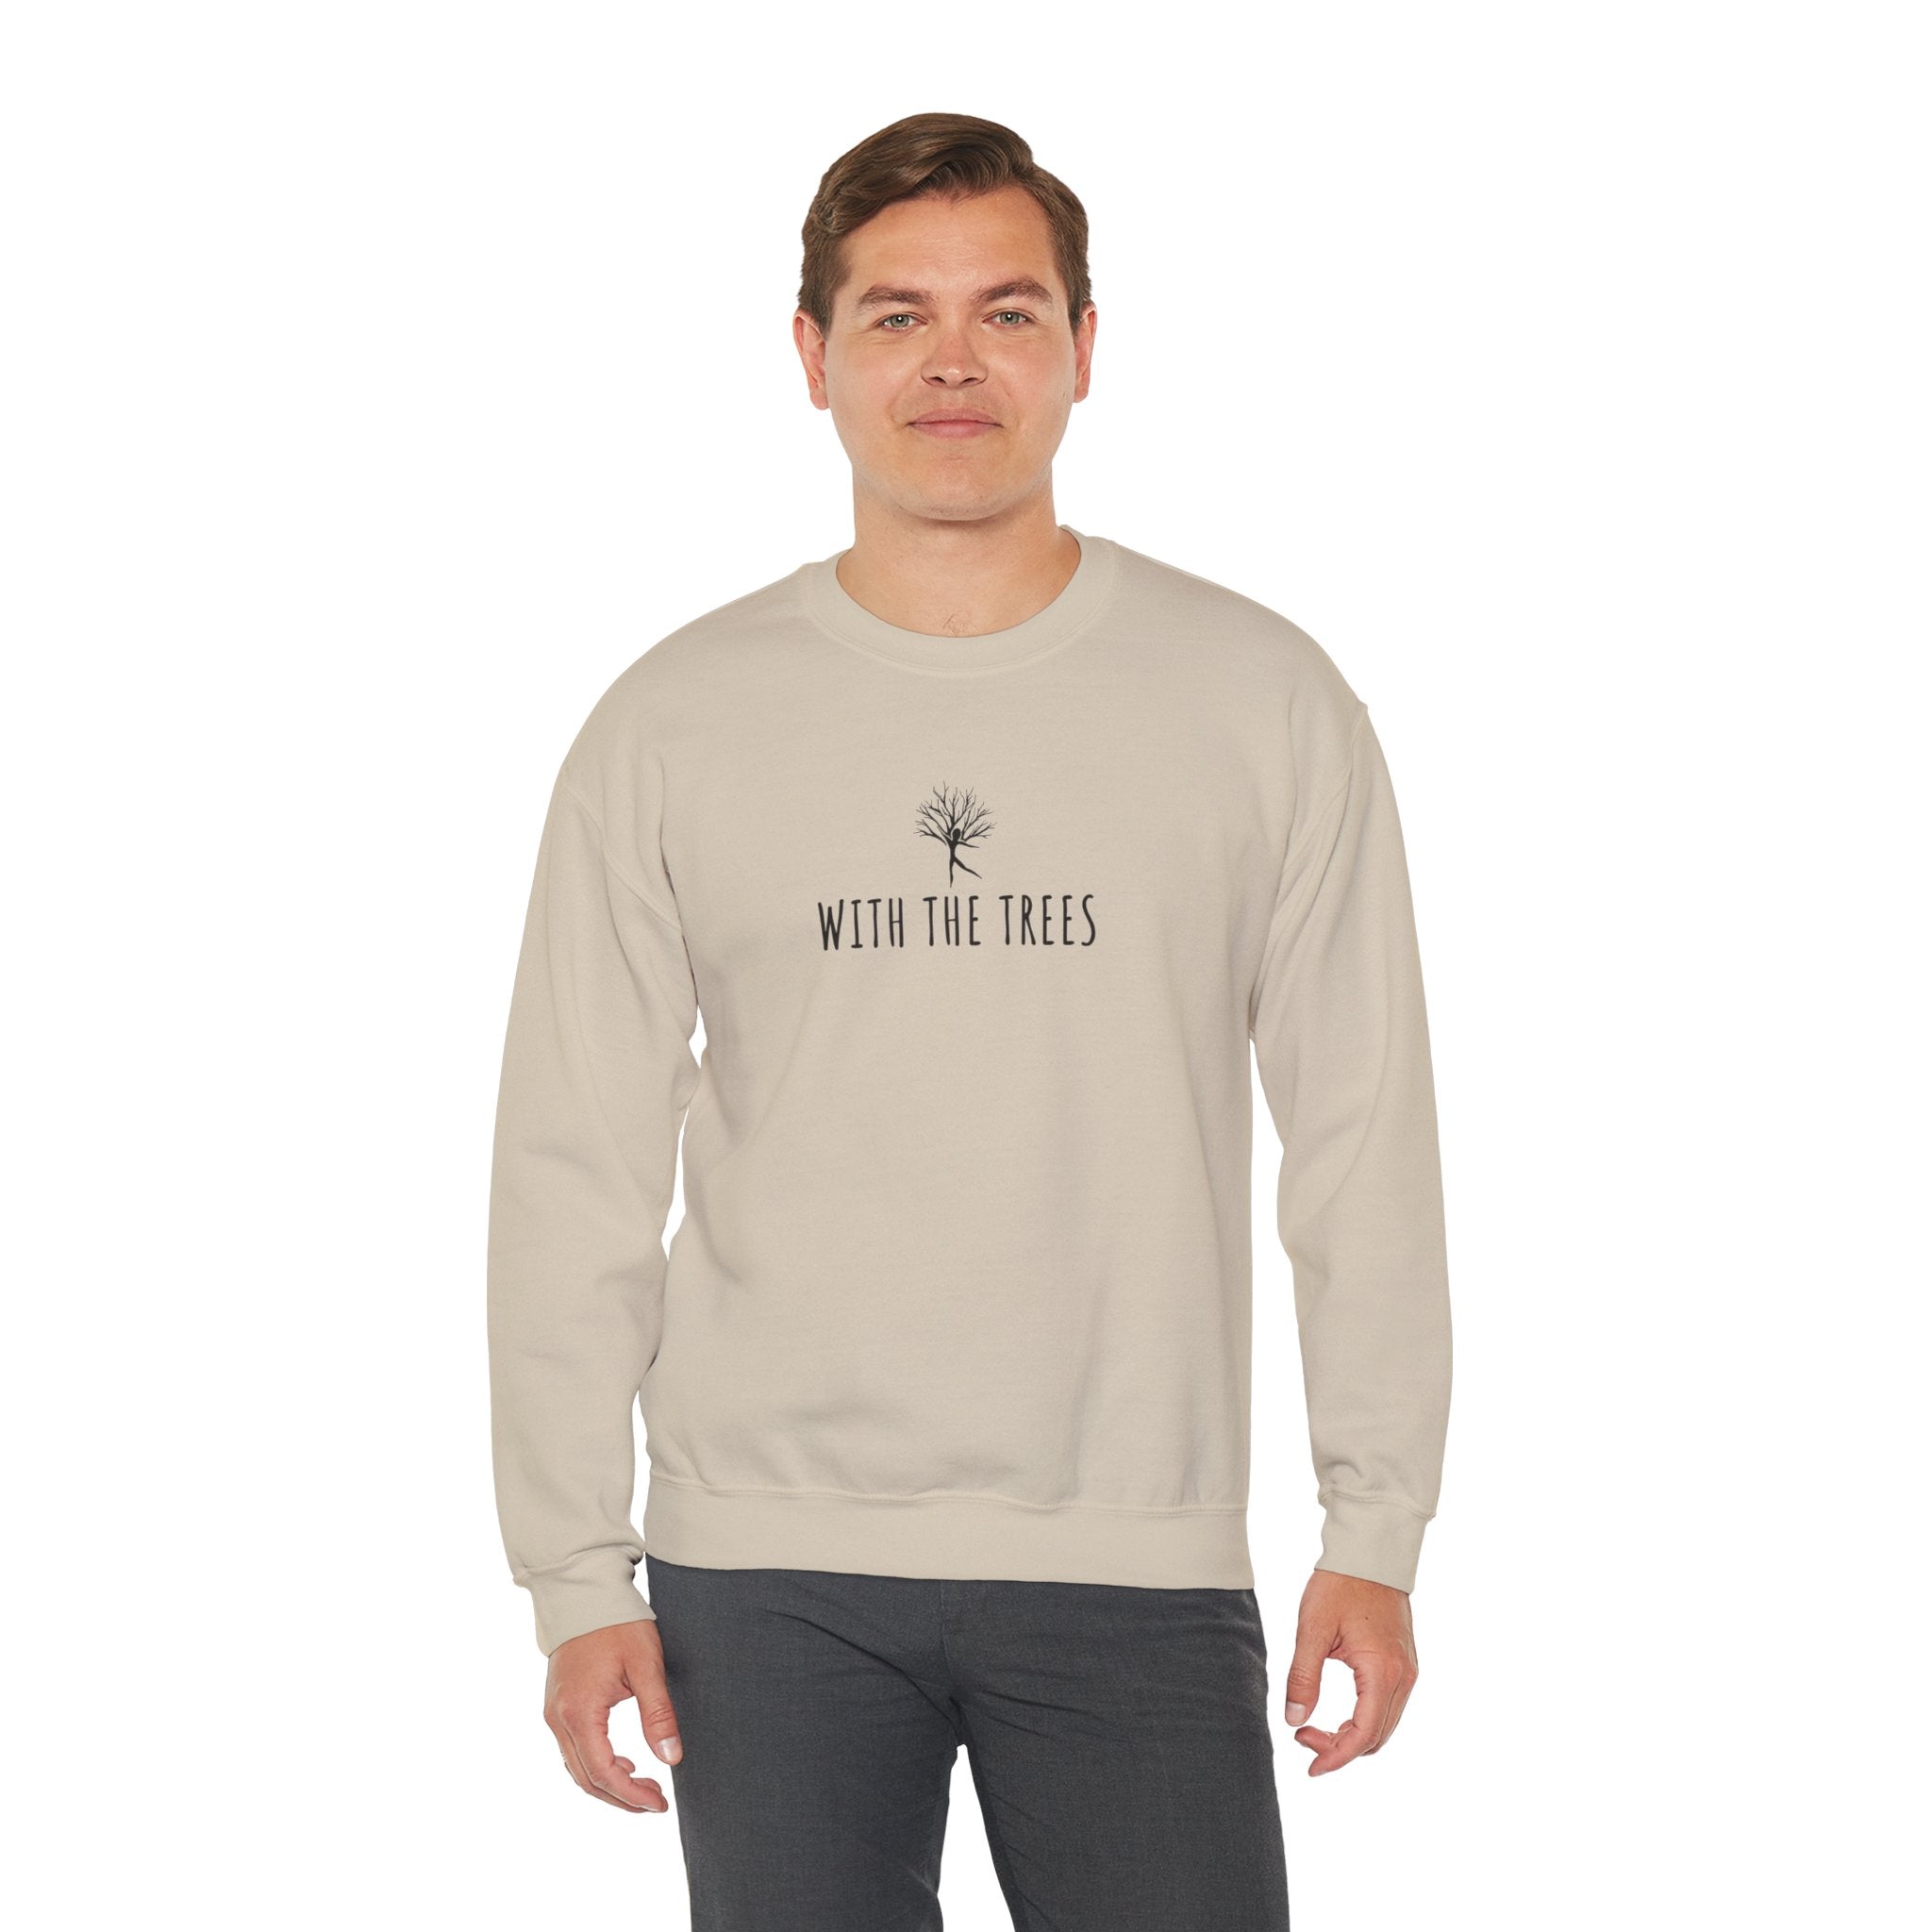 with the trees crewneck sweatshirt - with the trees